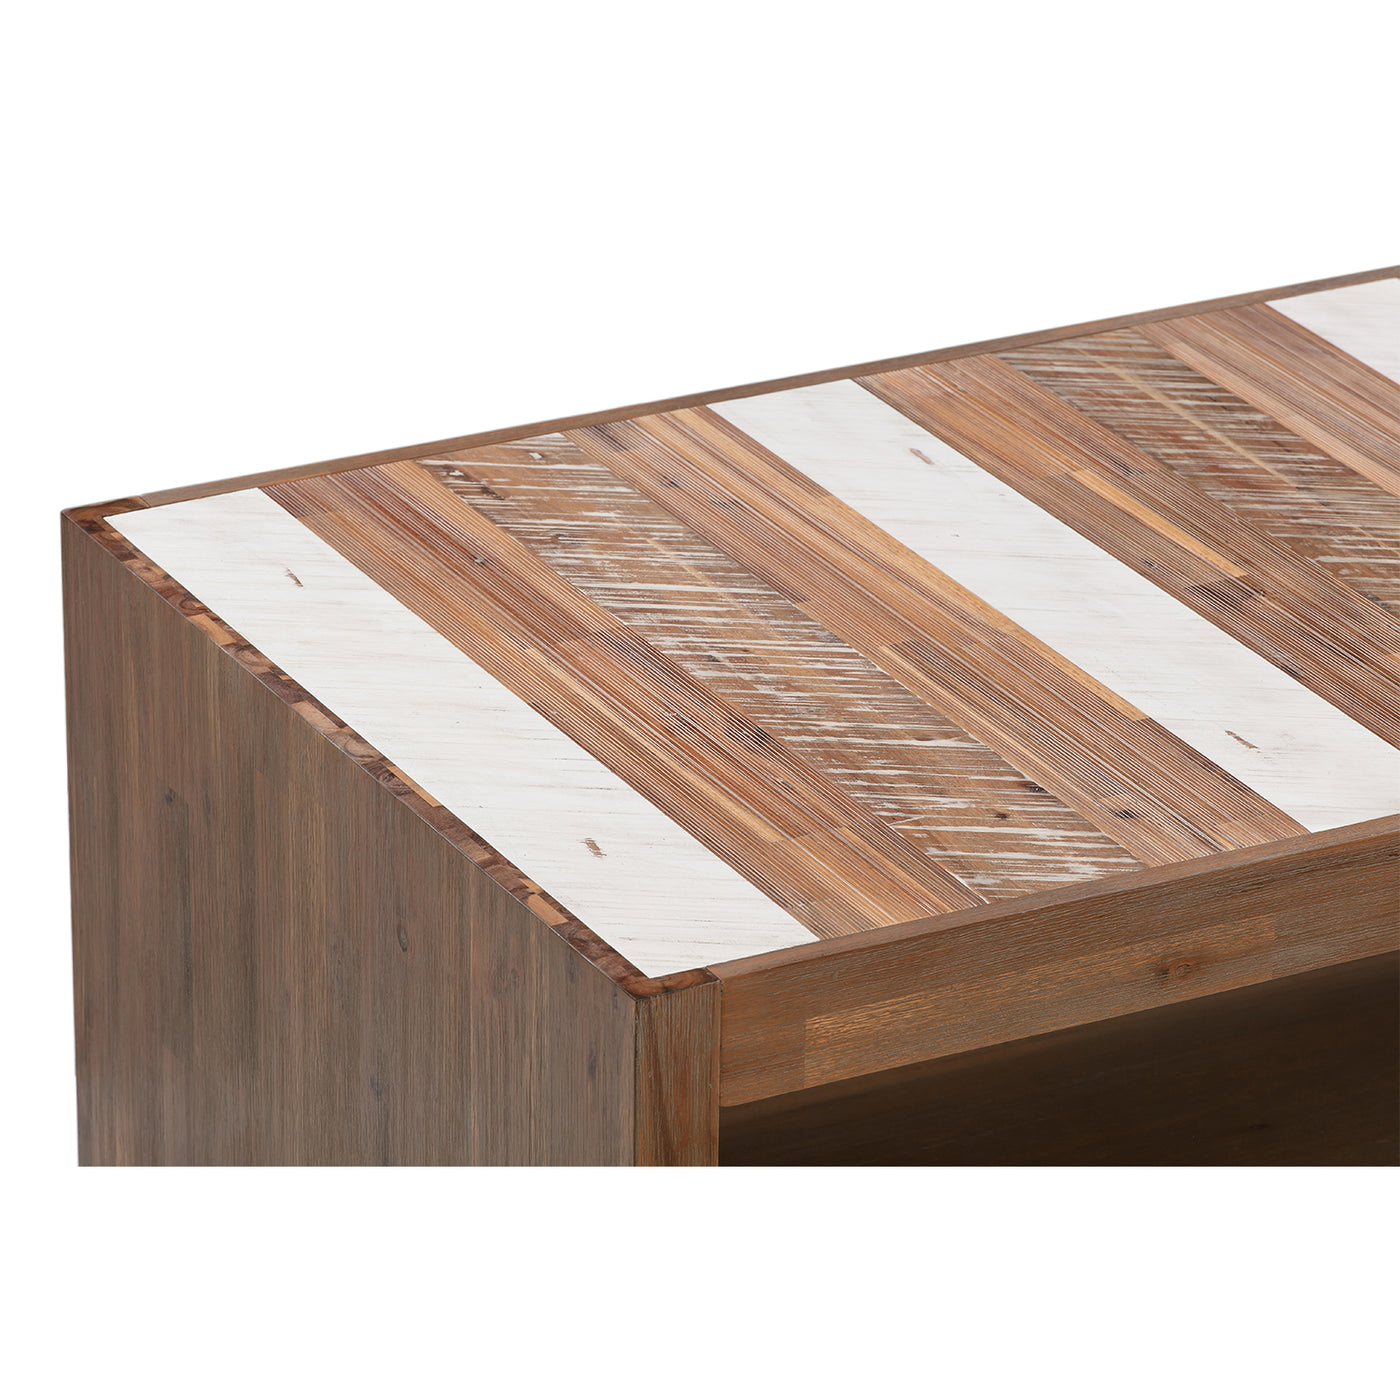 Medley Cocktail Table in Multi-toned Natural Finish